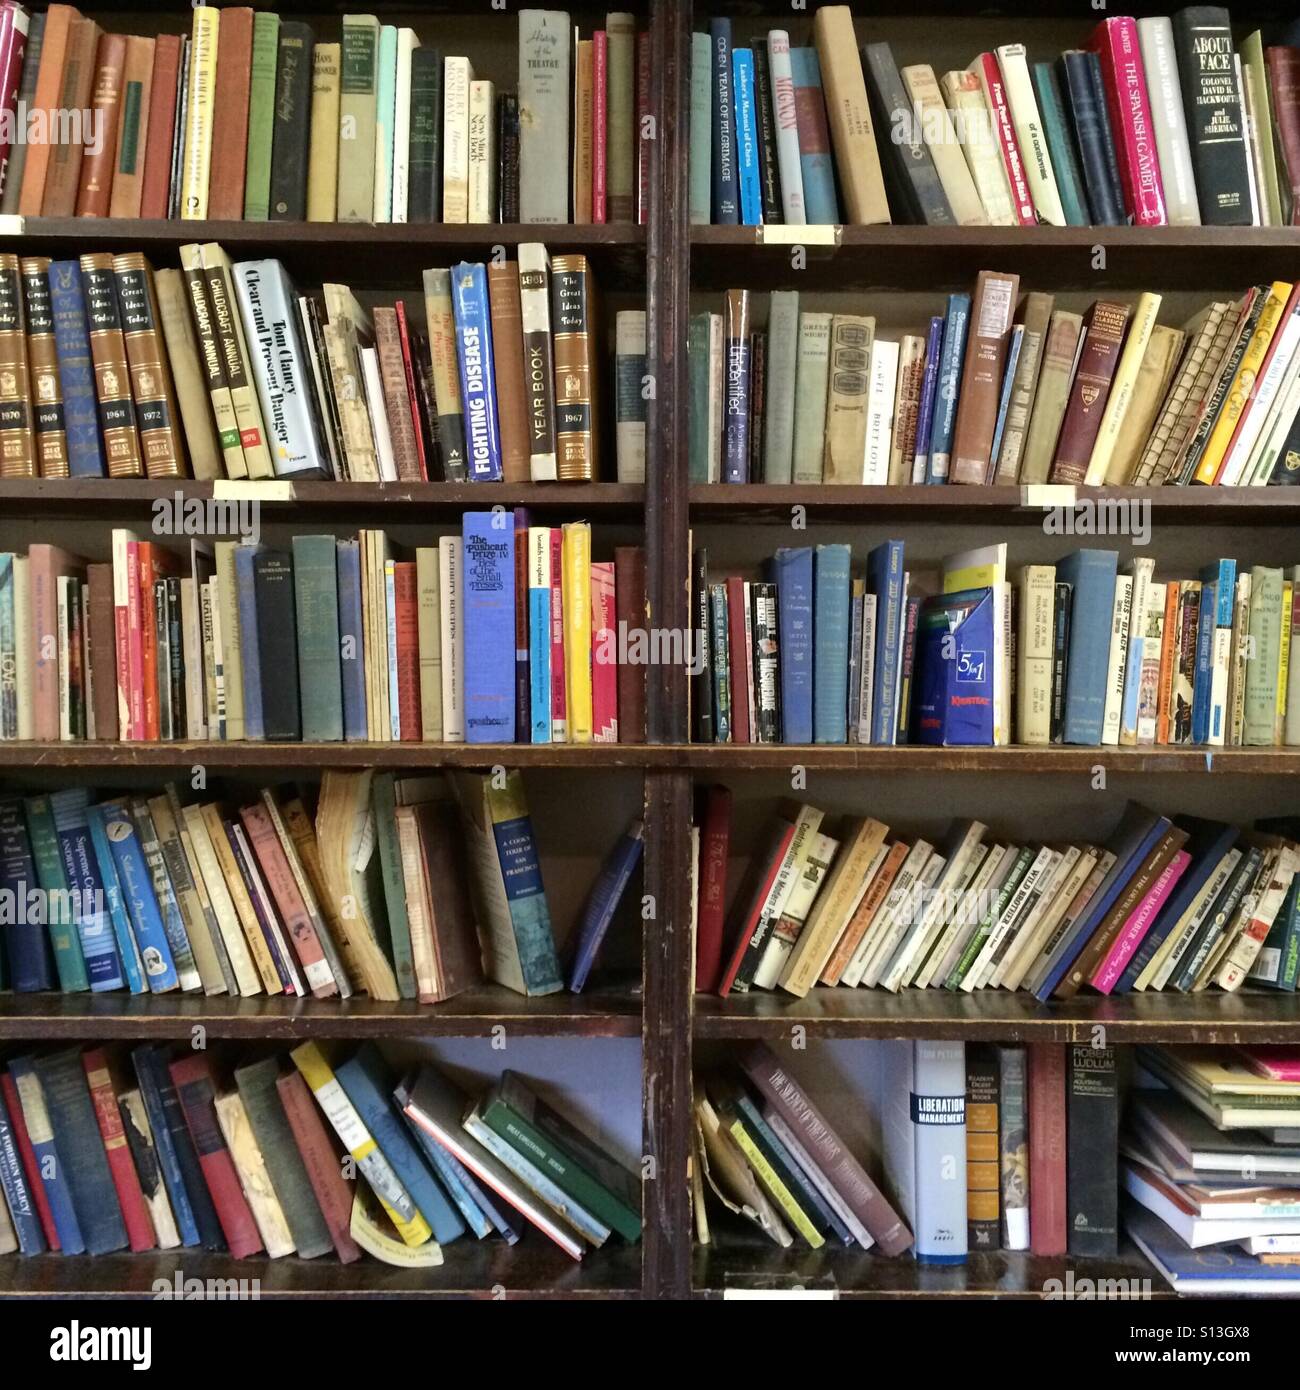 Bookshelf Filled With Old Books Stock Photo 310480416 Alamy